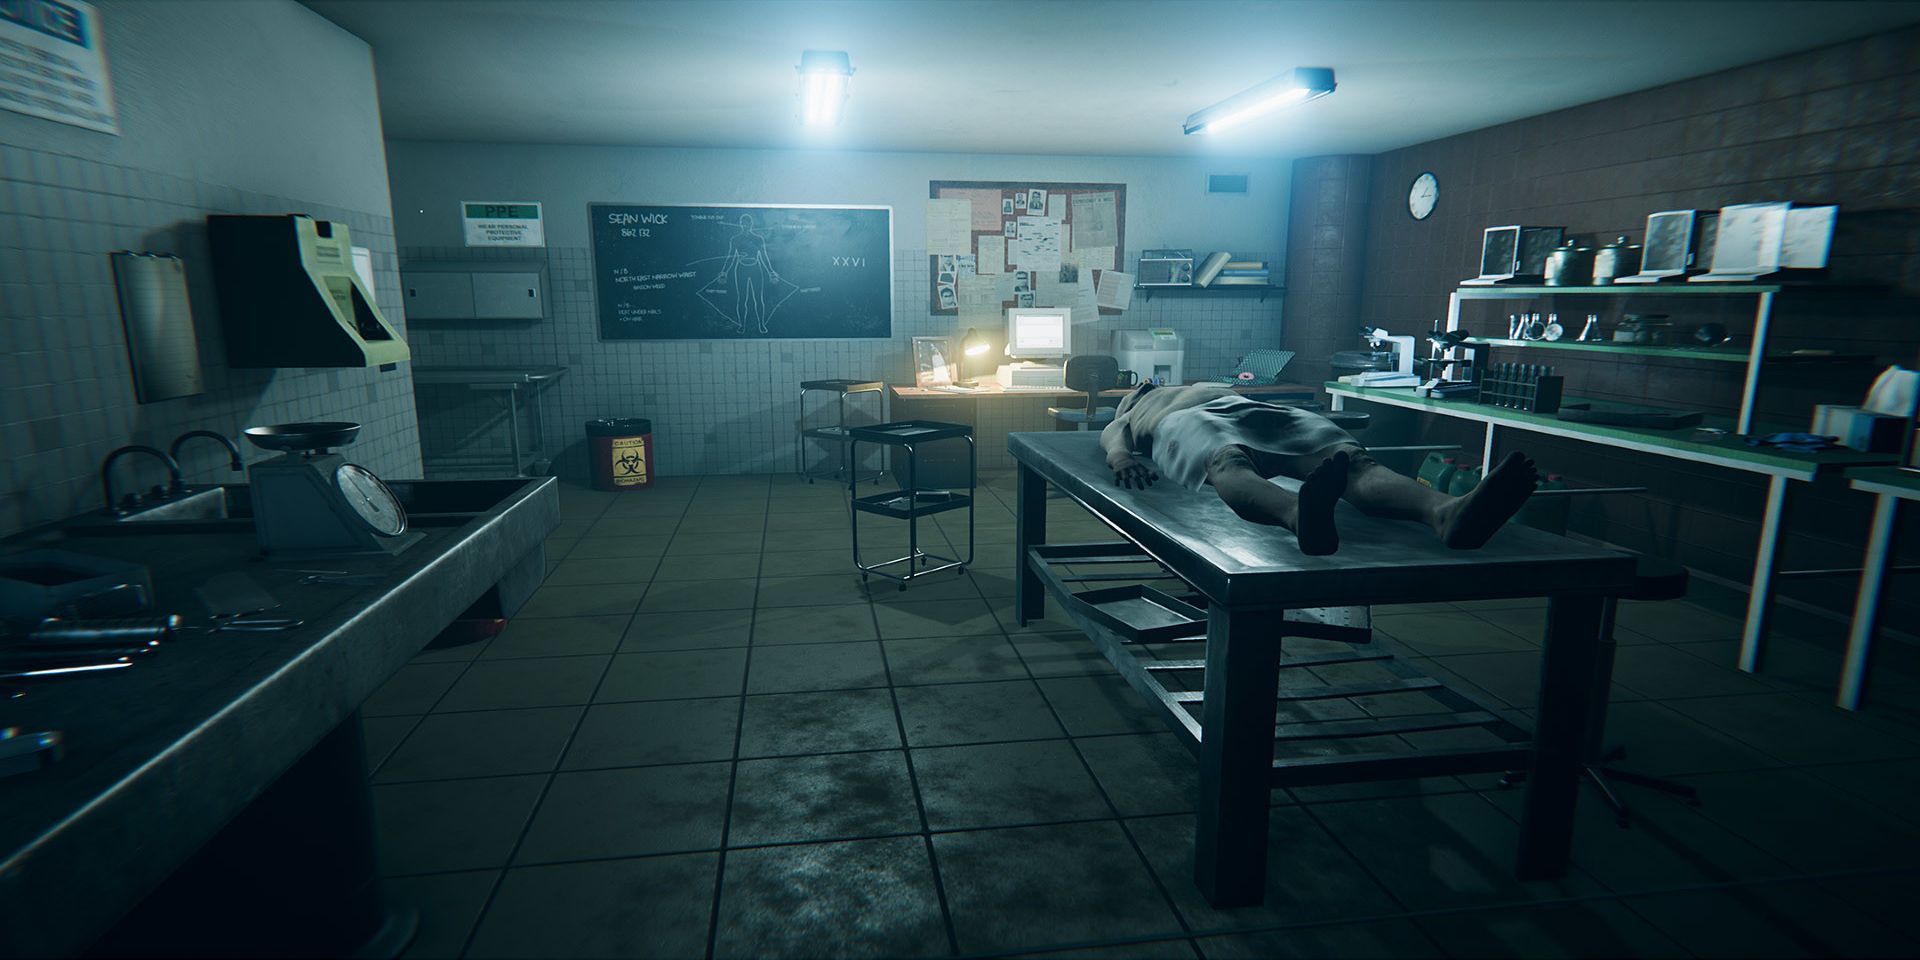 A still from the upcoming horror game Autopsy Simulator.